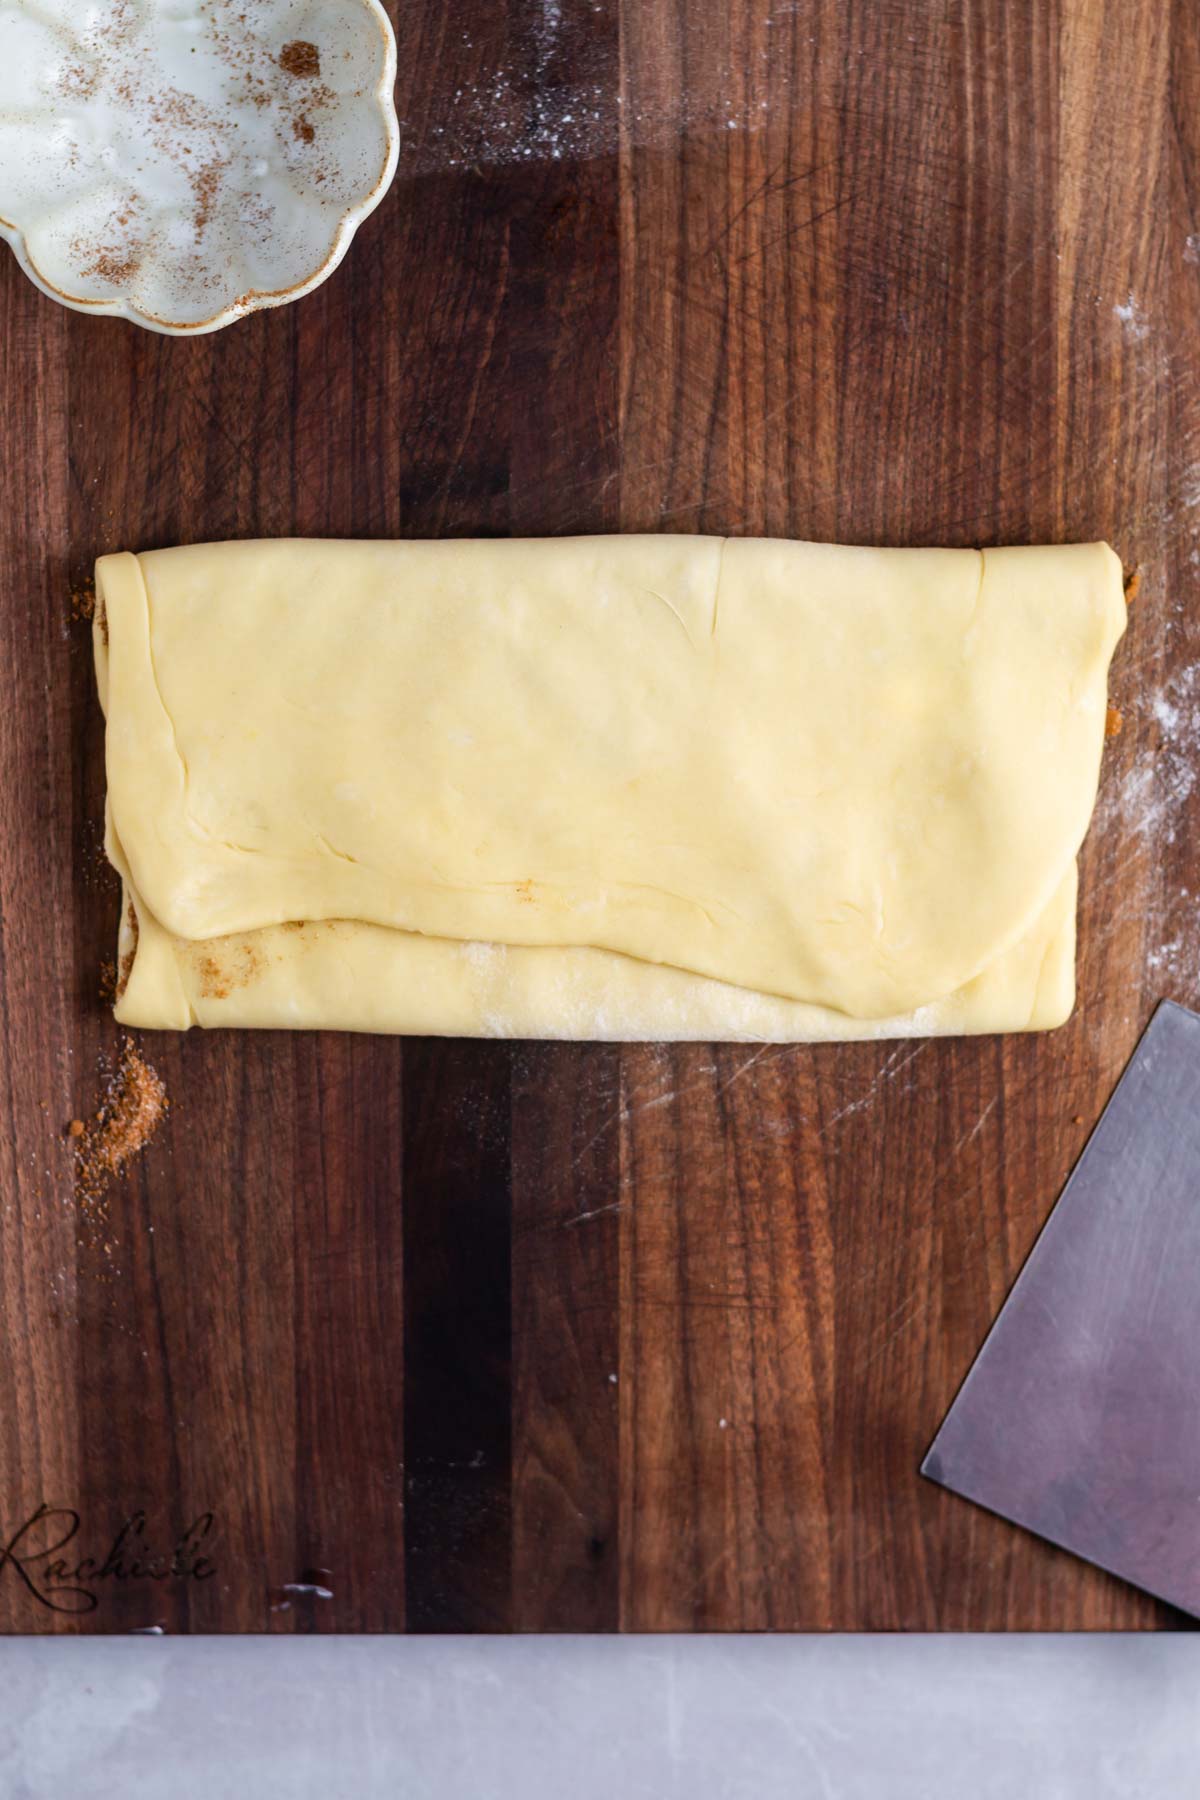 dough folded like a sheet of paper into thirds.